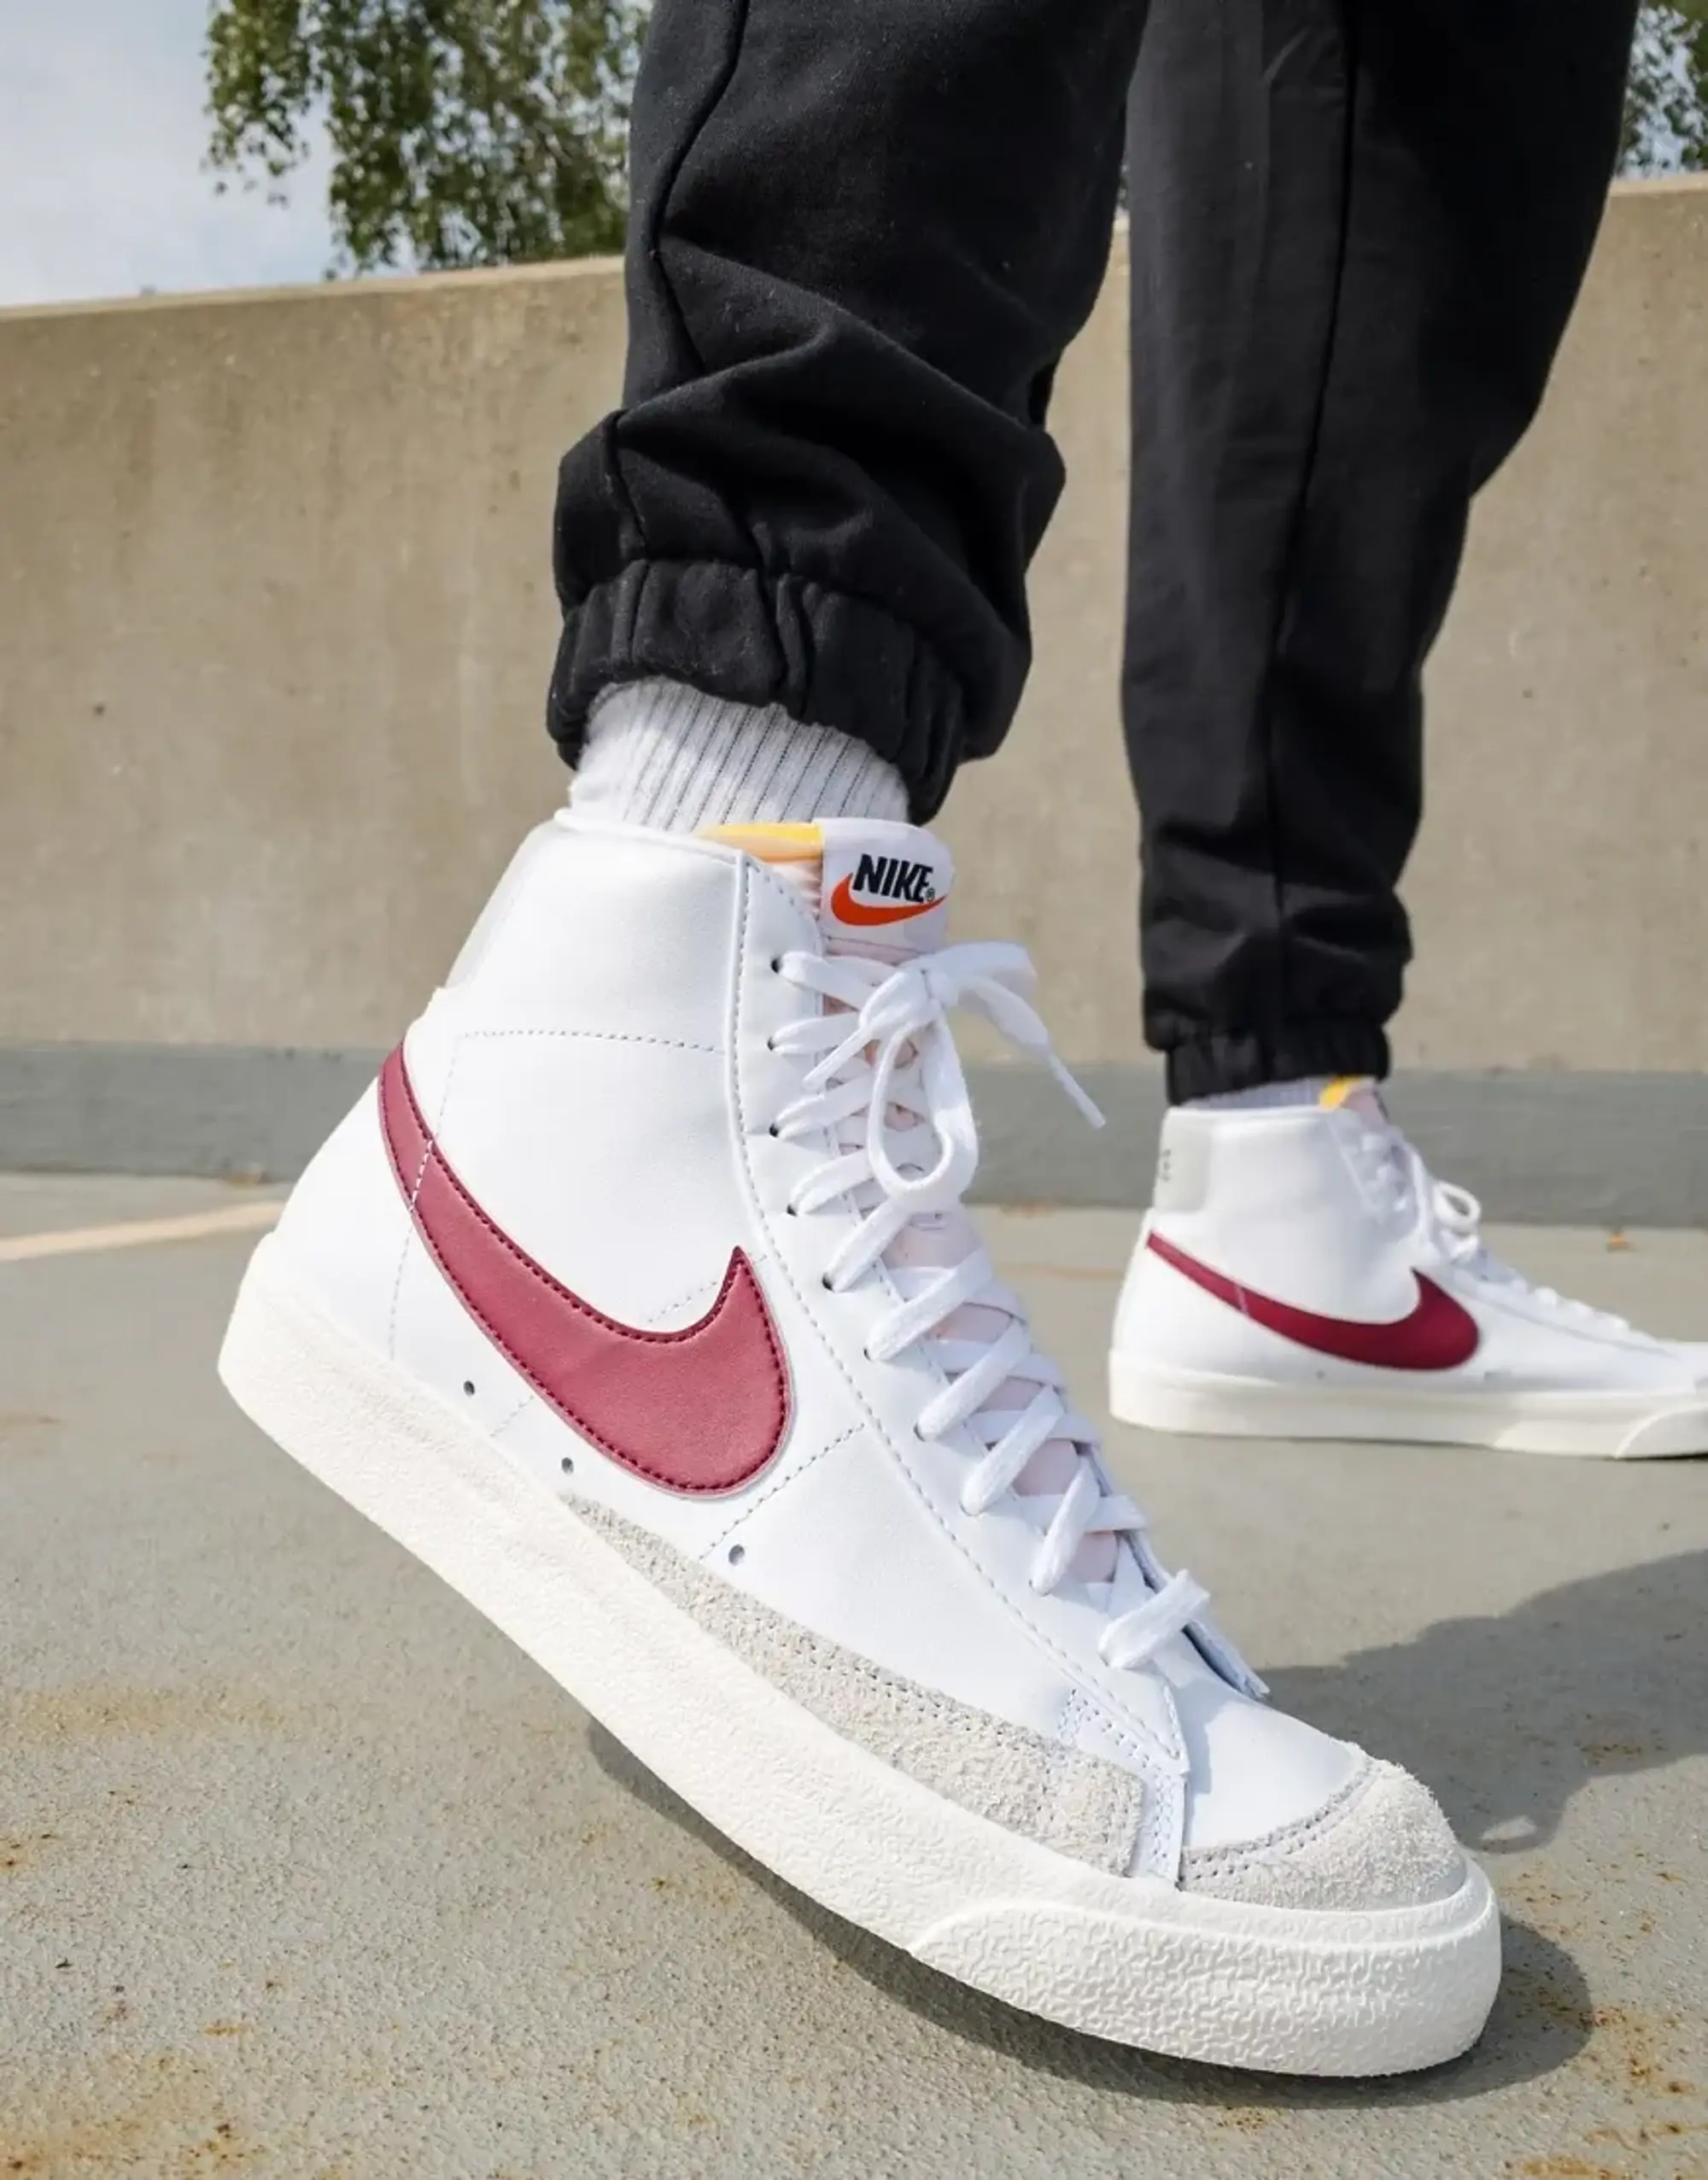 Nike Blazer Mid '77 Vintage Trainers In White And Beetroot Red